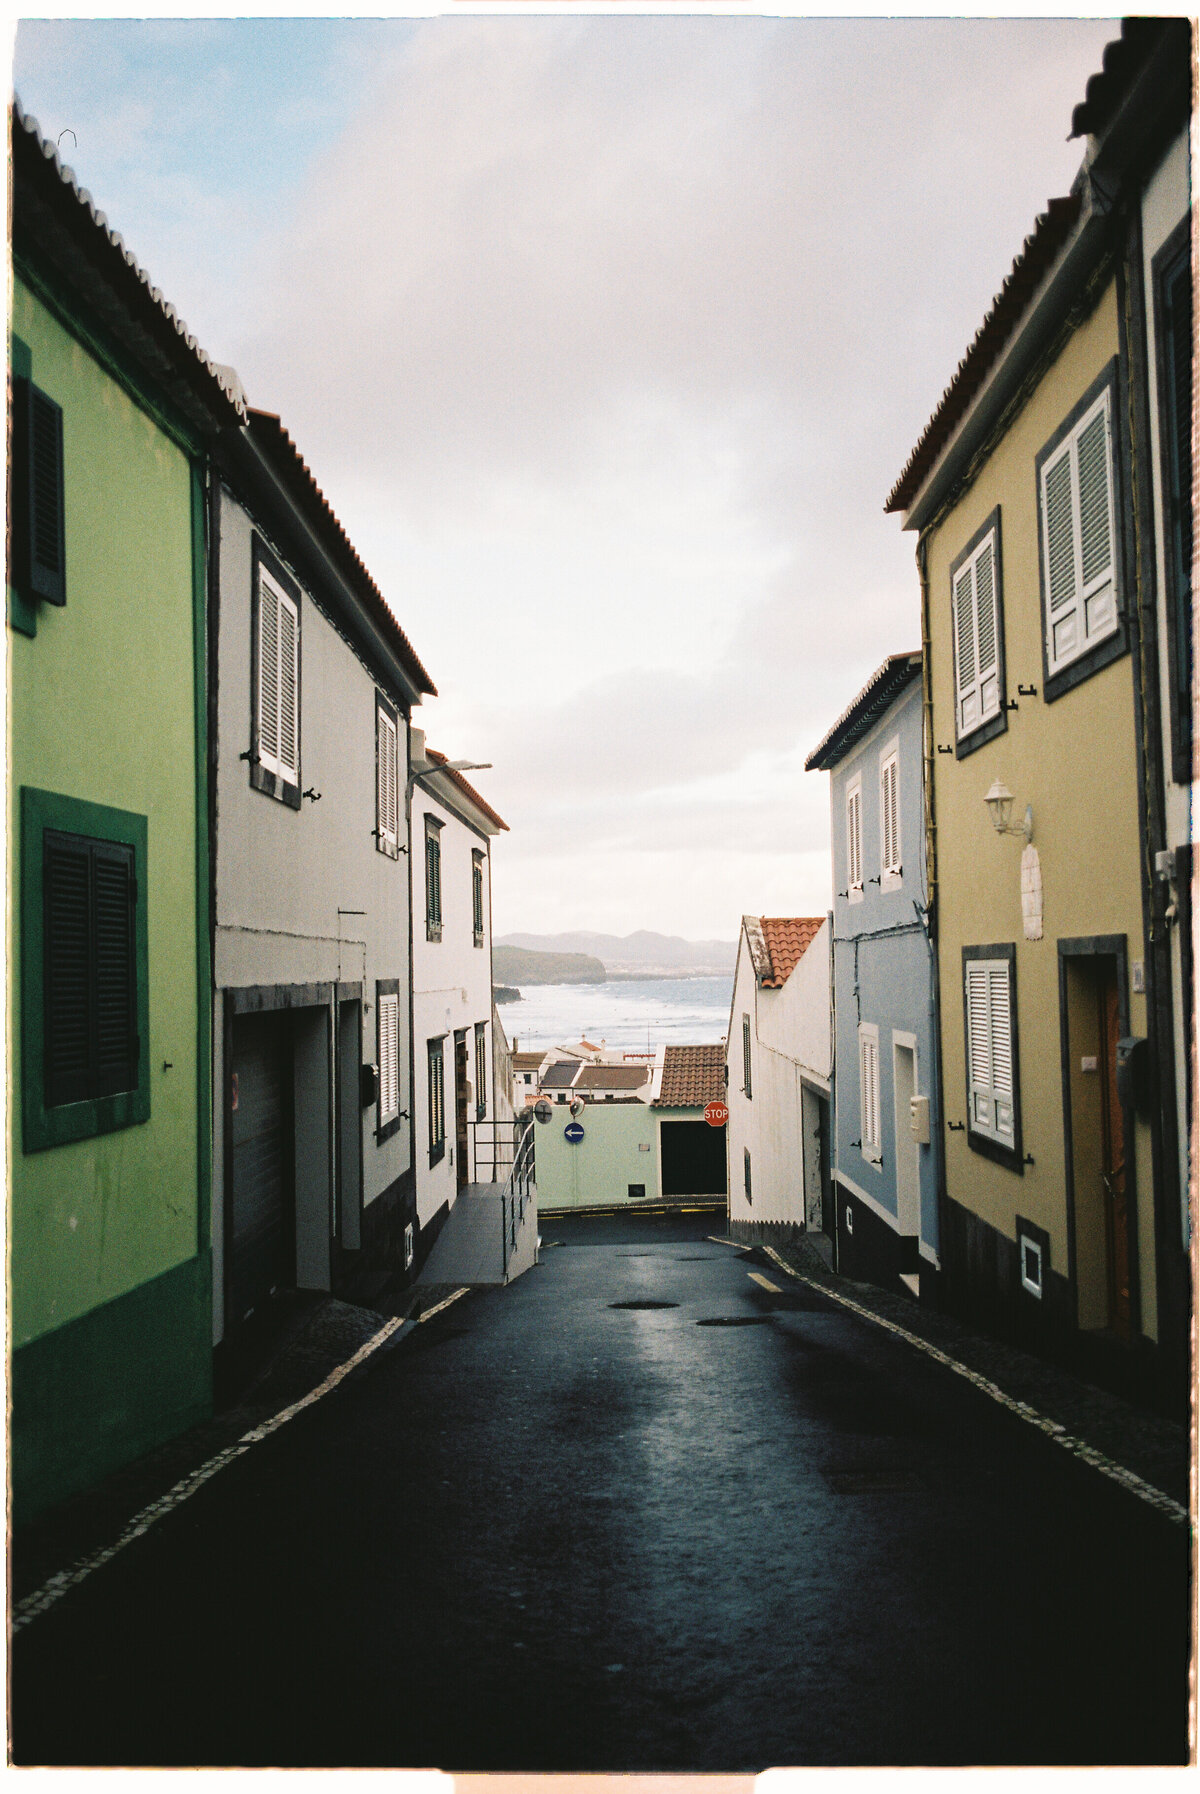 Azores-SaoMiguel-35mm-RaeConnell-0002 (1)